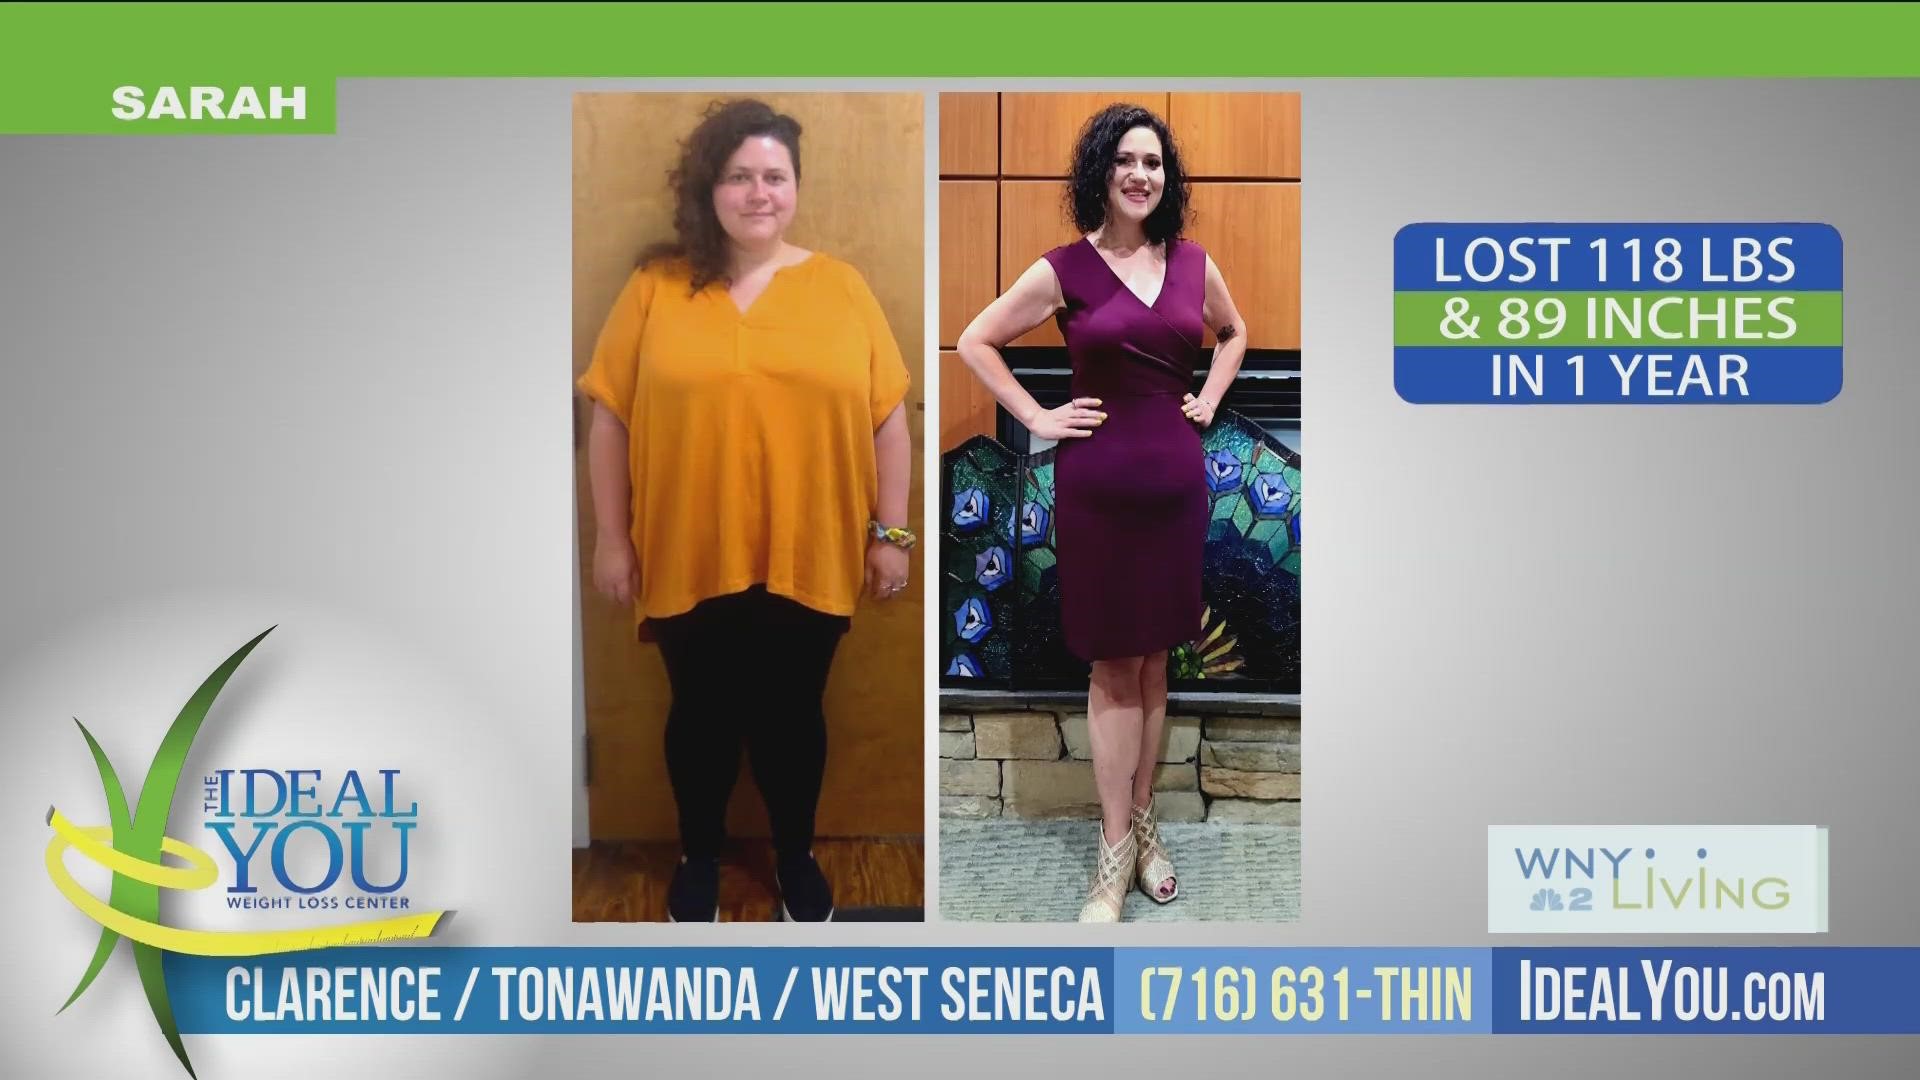 WNY Living - February 25th - The Ideal You Weight Loss Center - THIS VIDEO IS SPONSORED BY THE IDEAL YOU WEIGHT LOSS CENTER